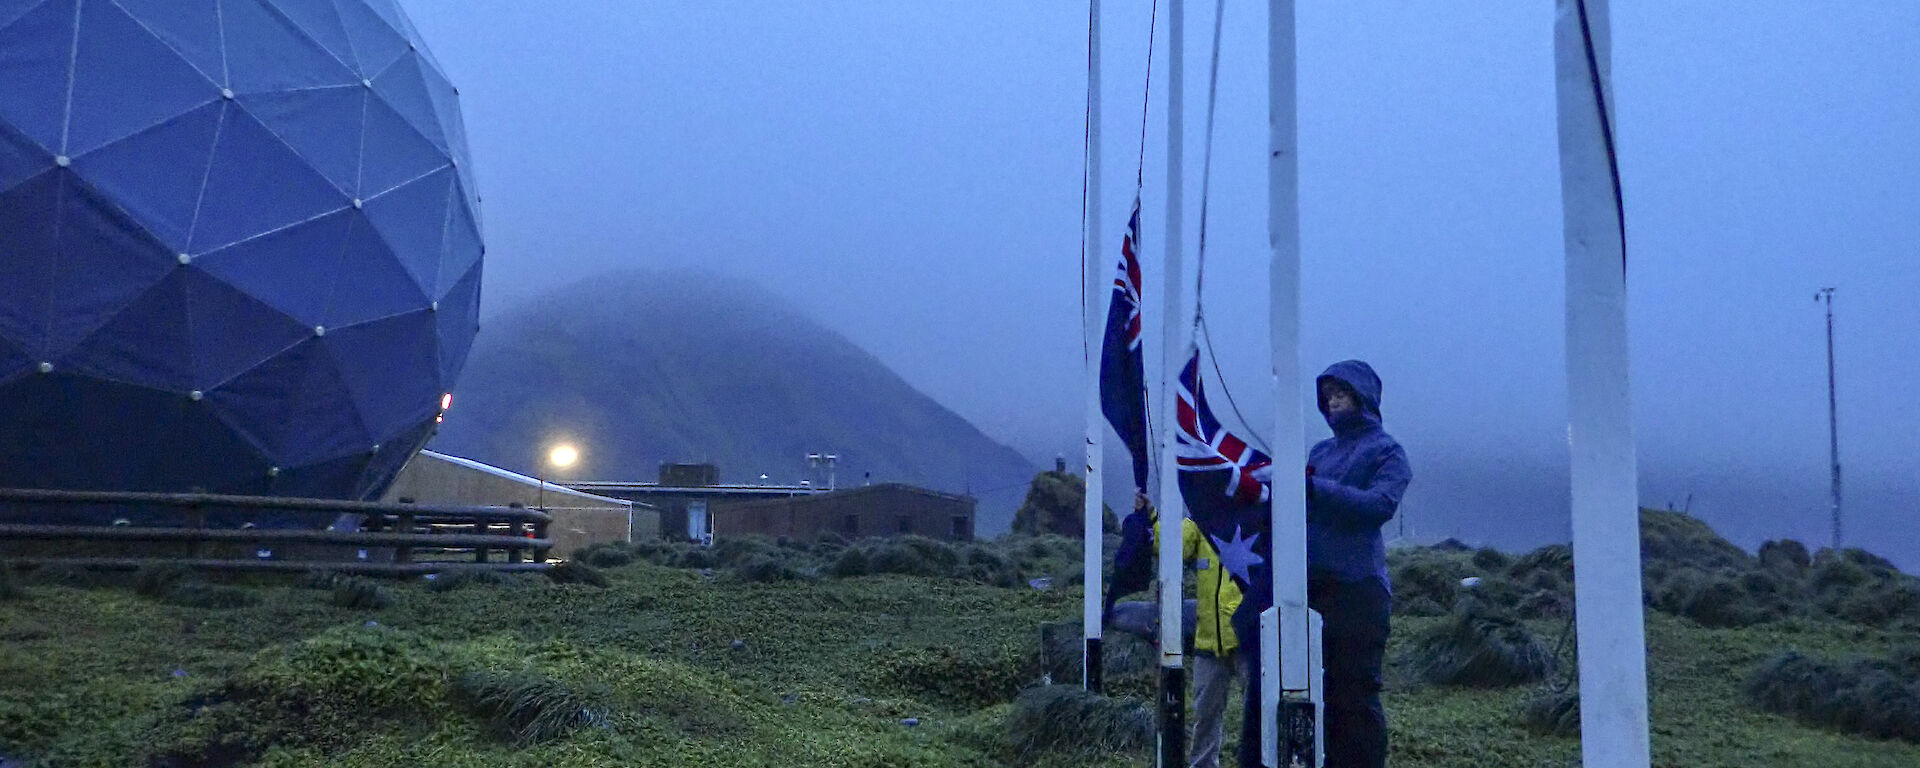 Two raincoat wearing epeditioners raise the NZ and Australian flags at dawn (0632) on the isthmus Macquarie Island